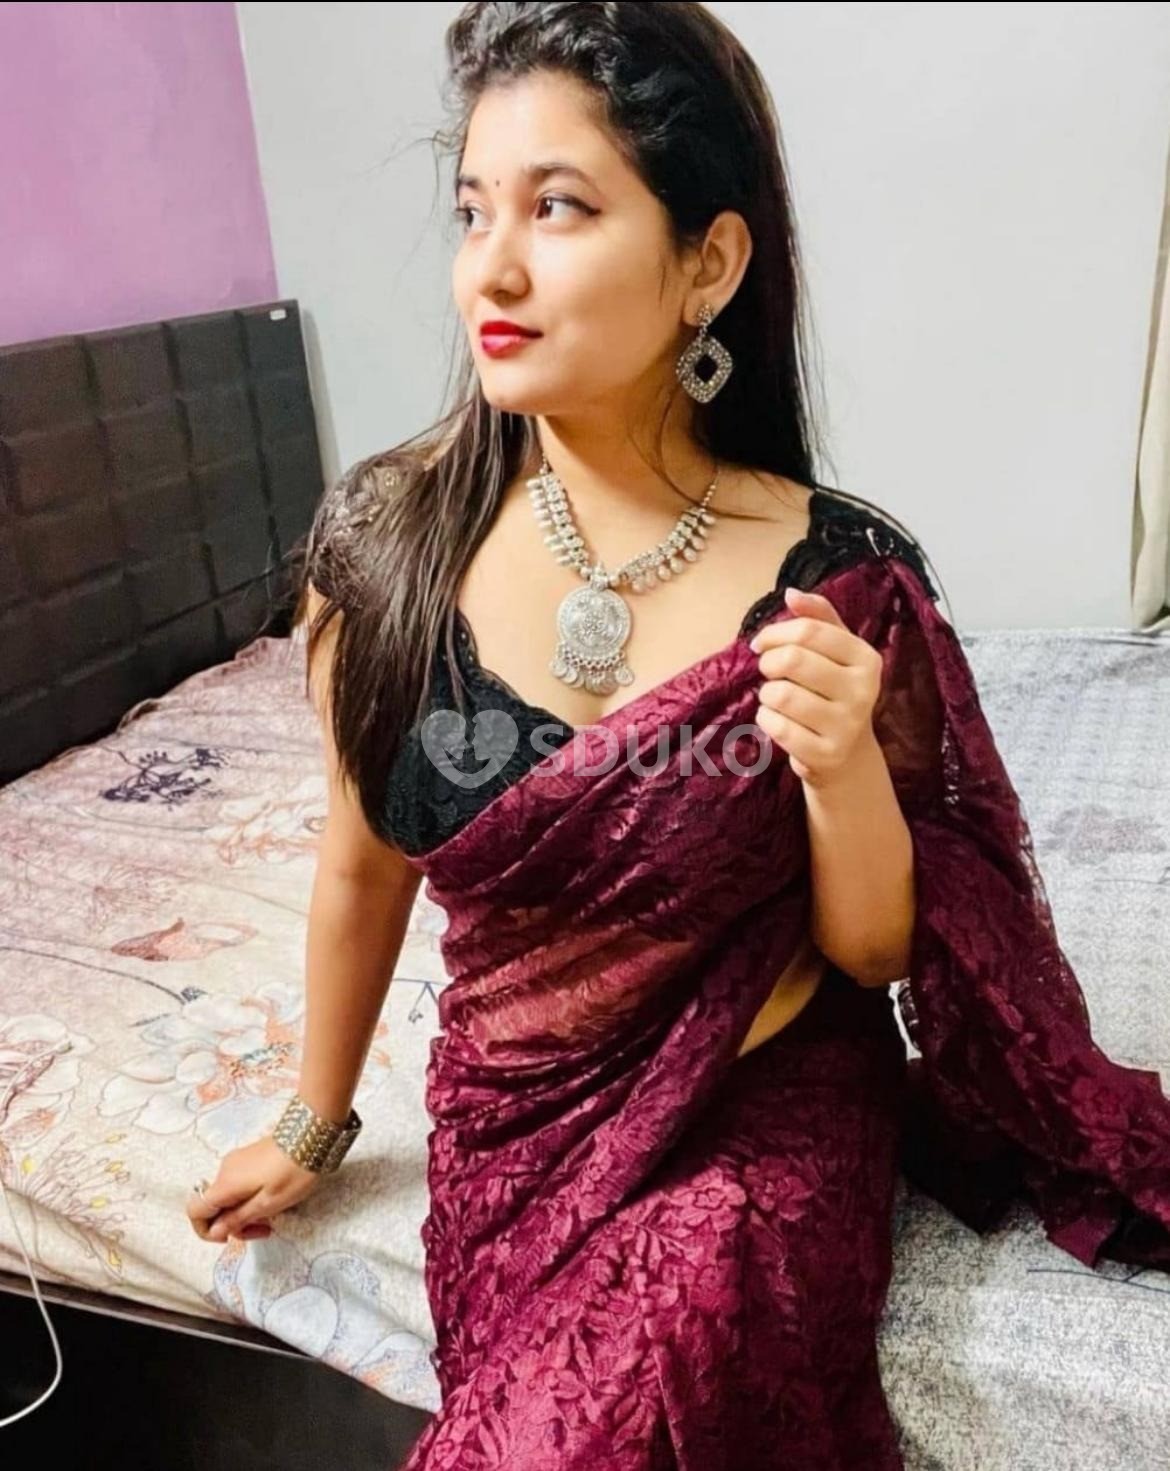 GANDHINAGAR TODAY 100% SAFE AND SECURE TODAY LOW PRICE UNLIMITED ENJOY HOT COLLEGE GIRL HOUSEWIFE AUNTIES AVAILABLE ALL